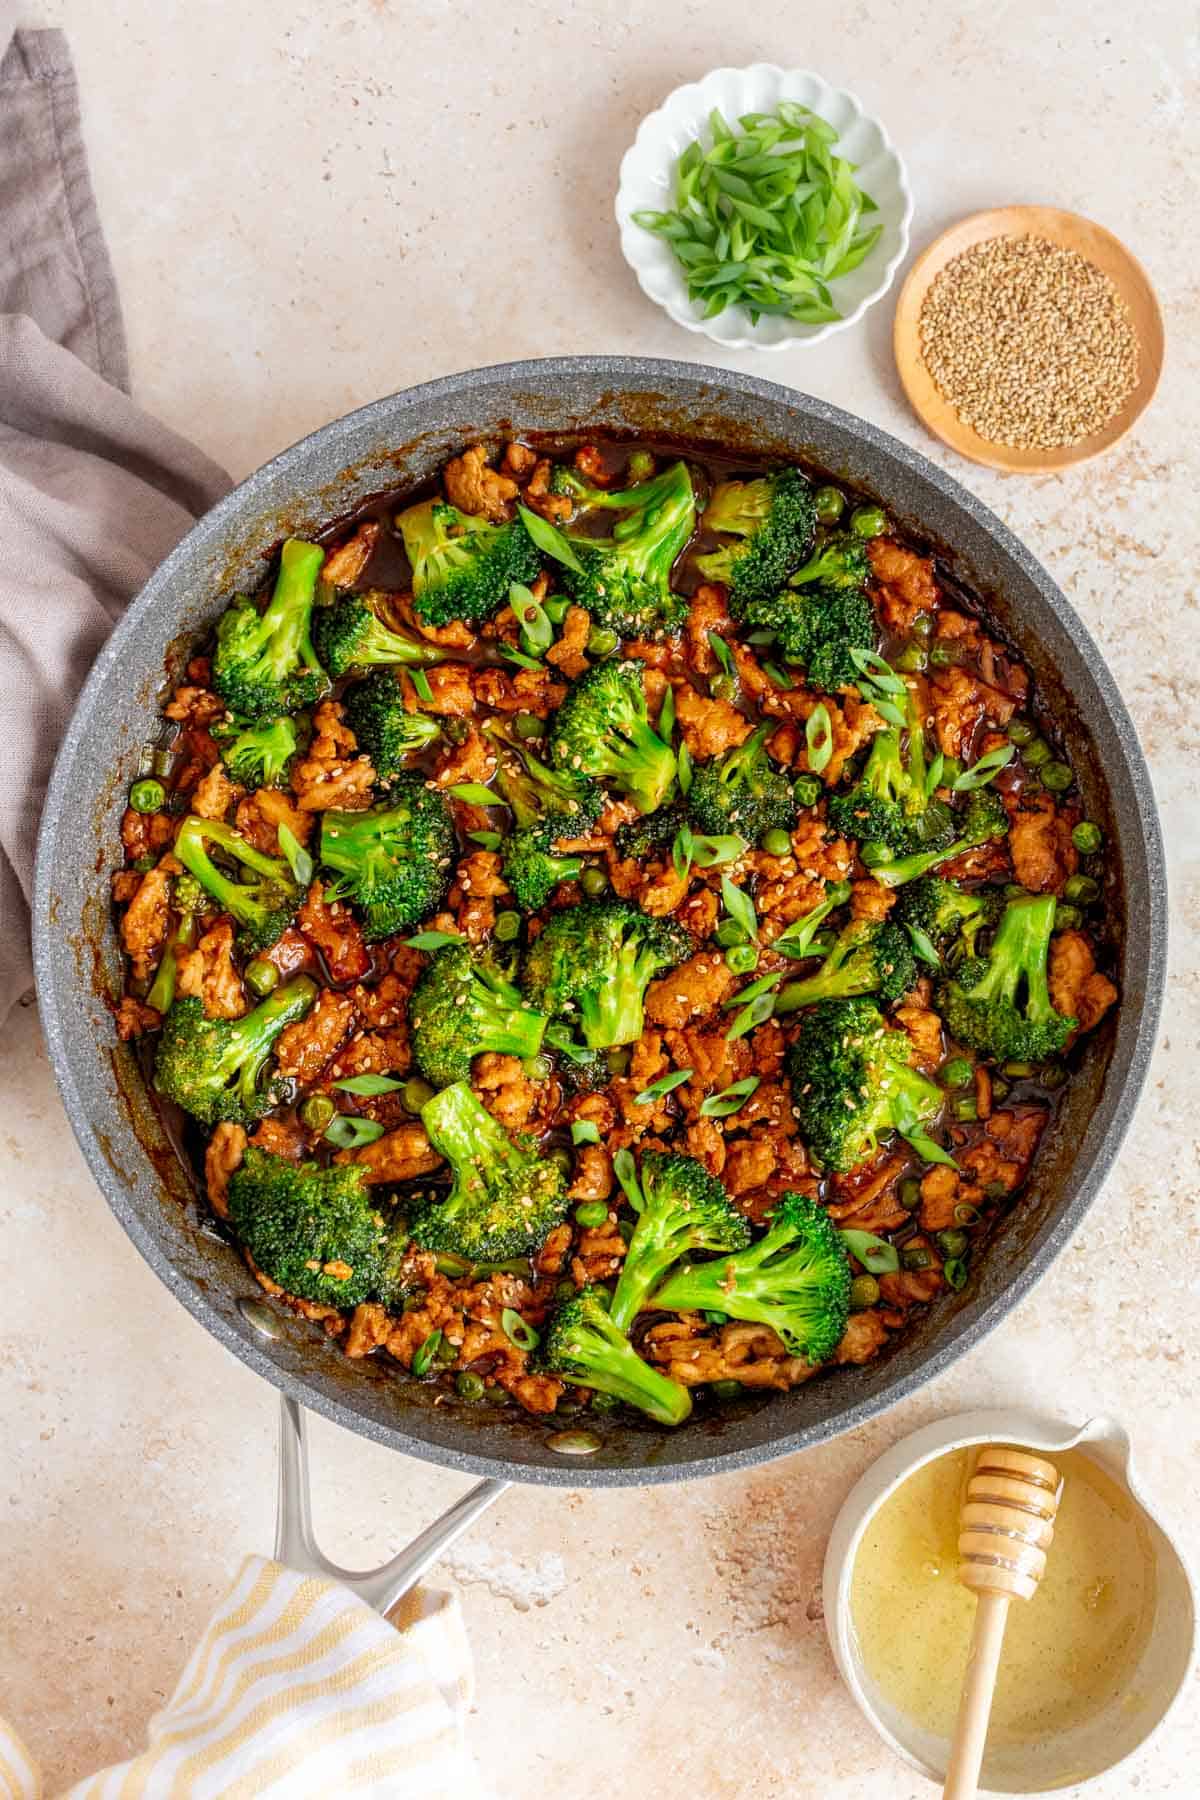 An overhead view of a skillet of honey sriracha ground chicken and broccoli. Garnishes and honey on the side.